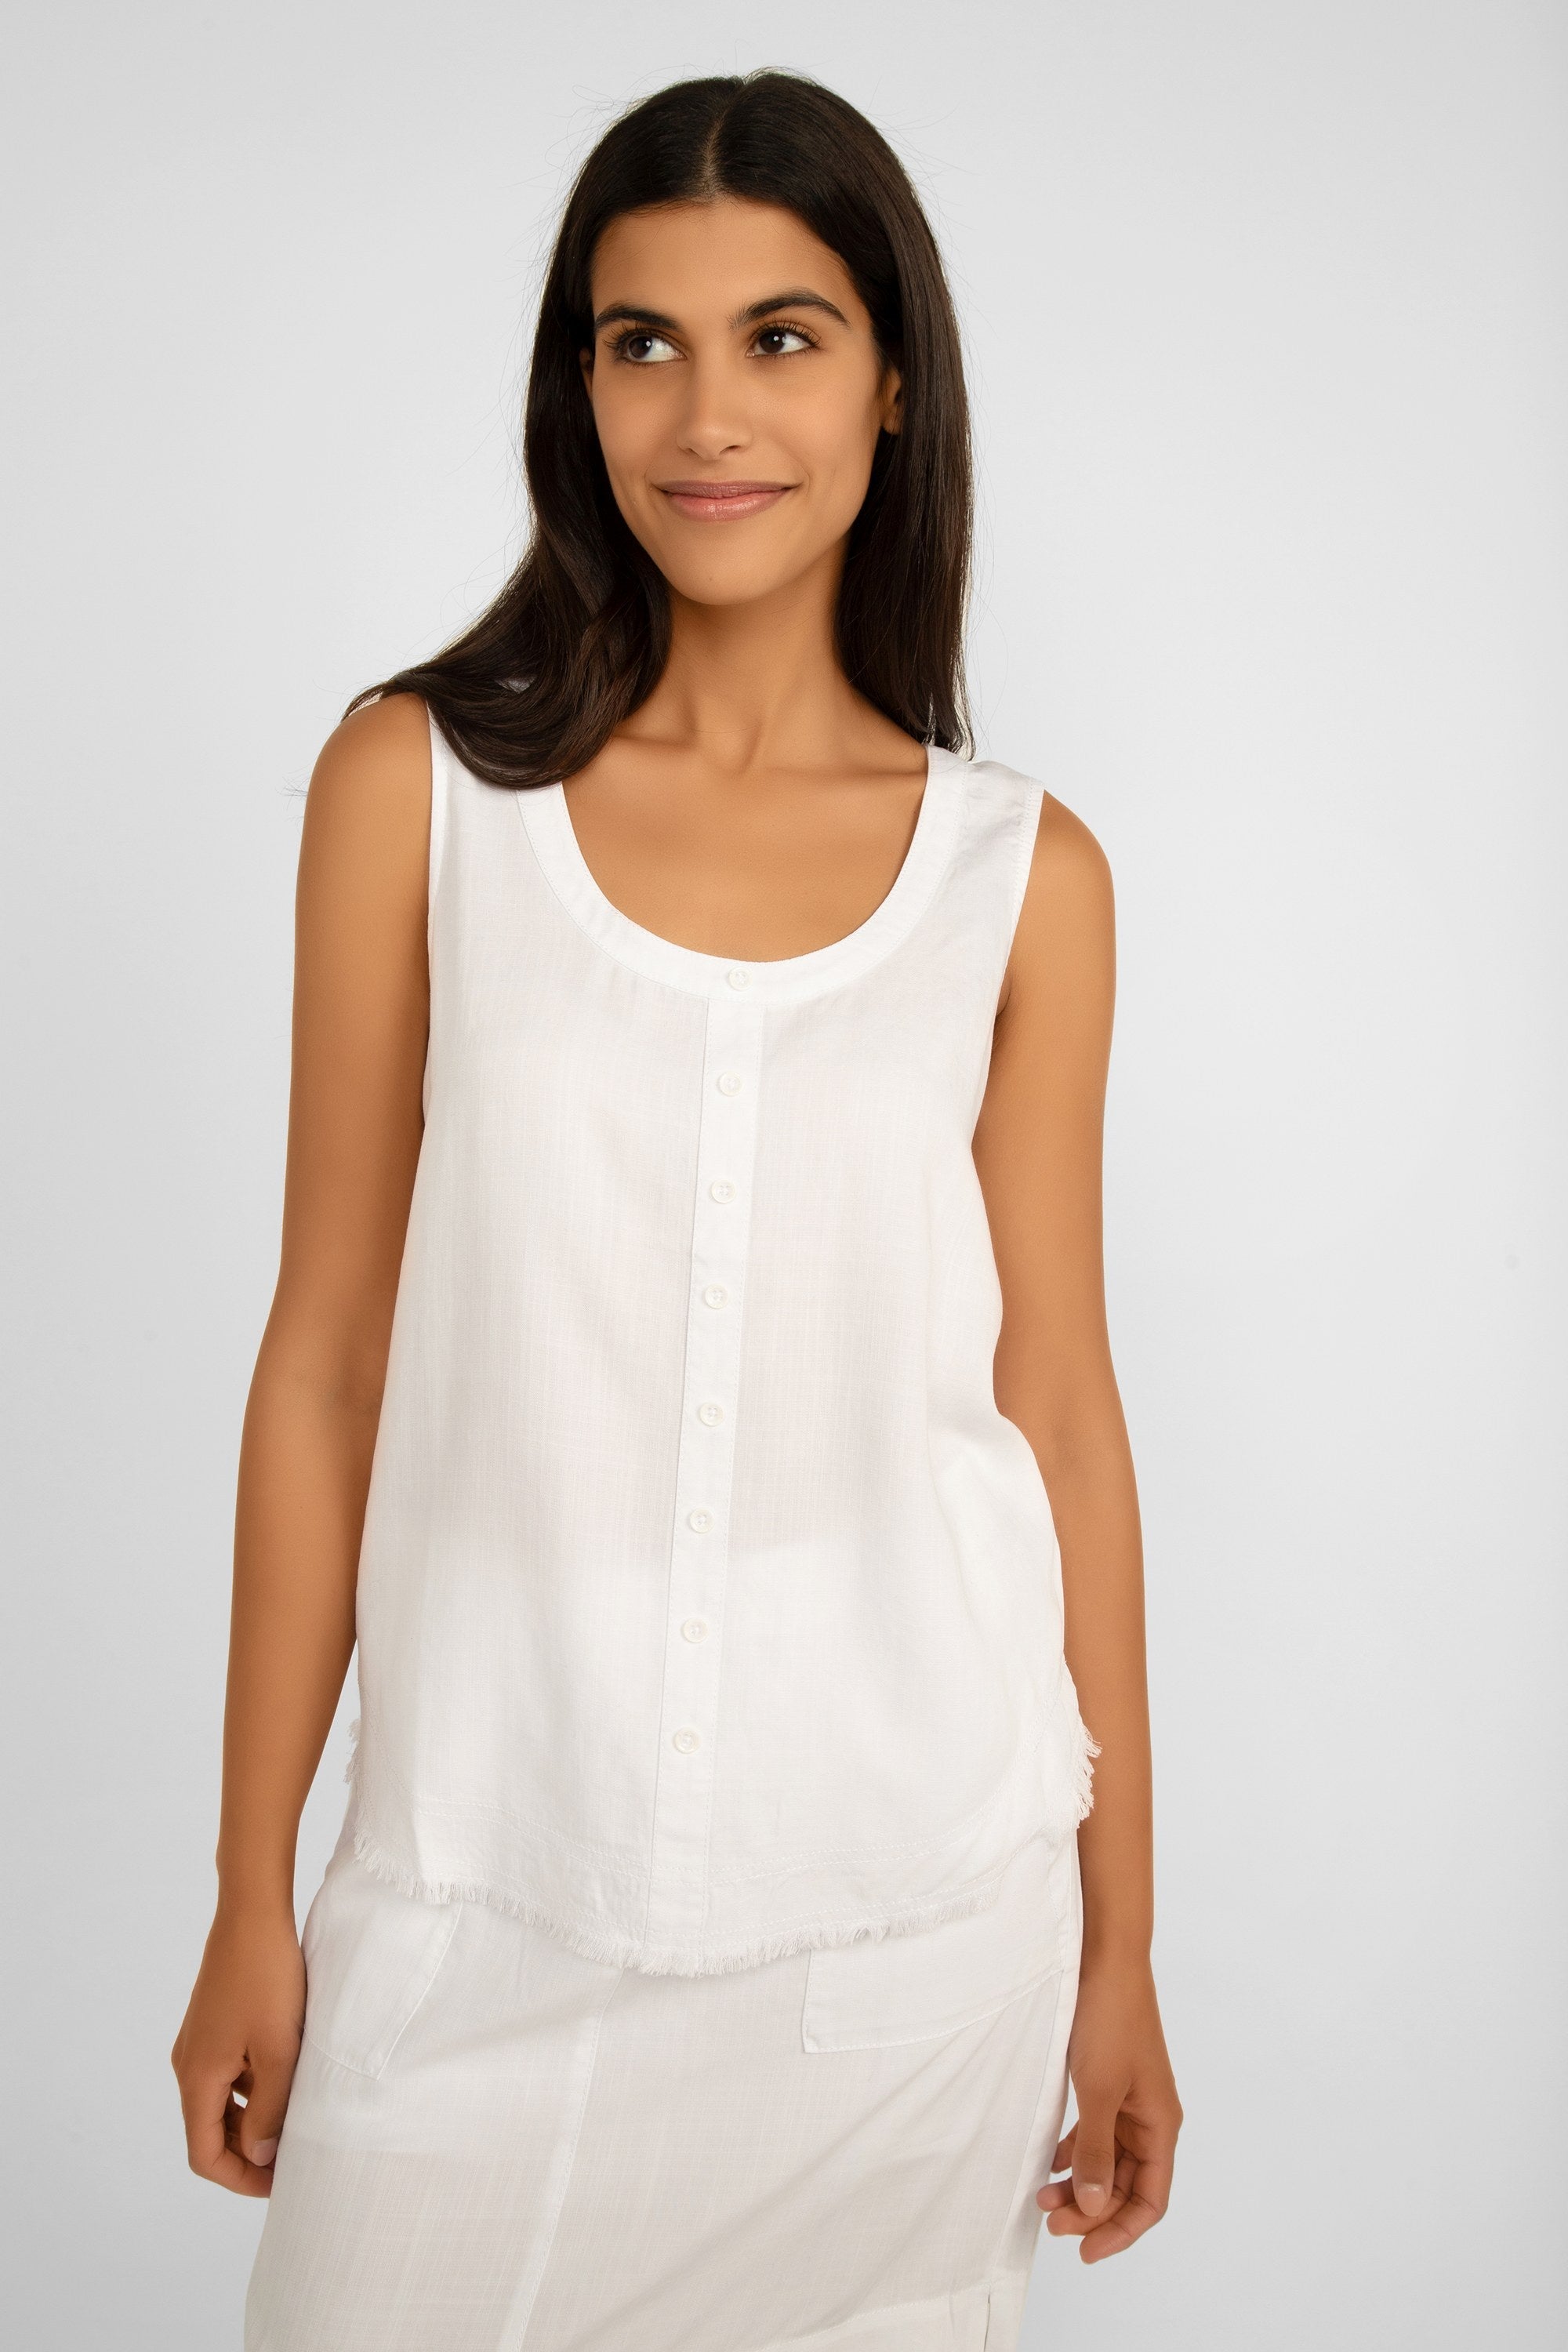 Renuar Clothing (R5015-E2142) Women's Sleeveless Tencel Tank Top with Button Front & Frayed Hem in White